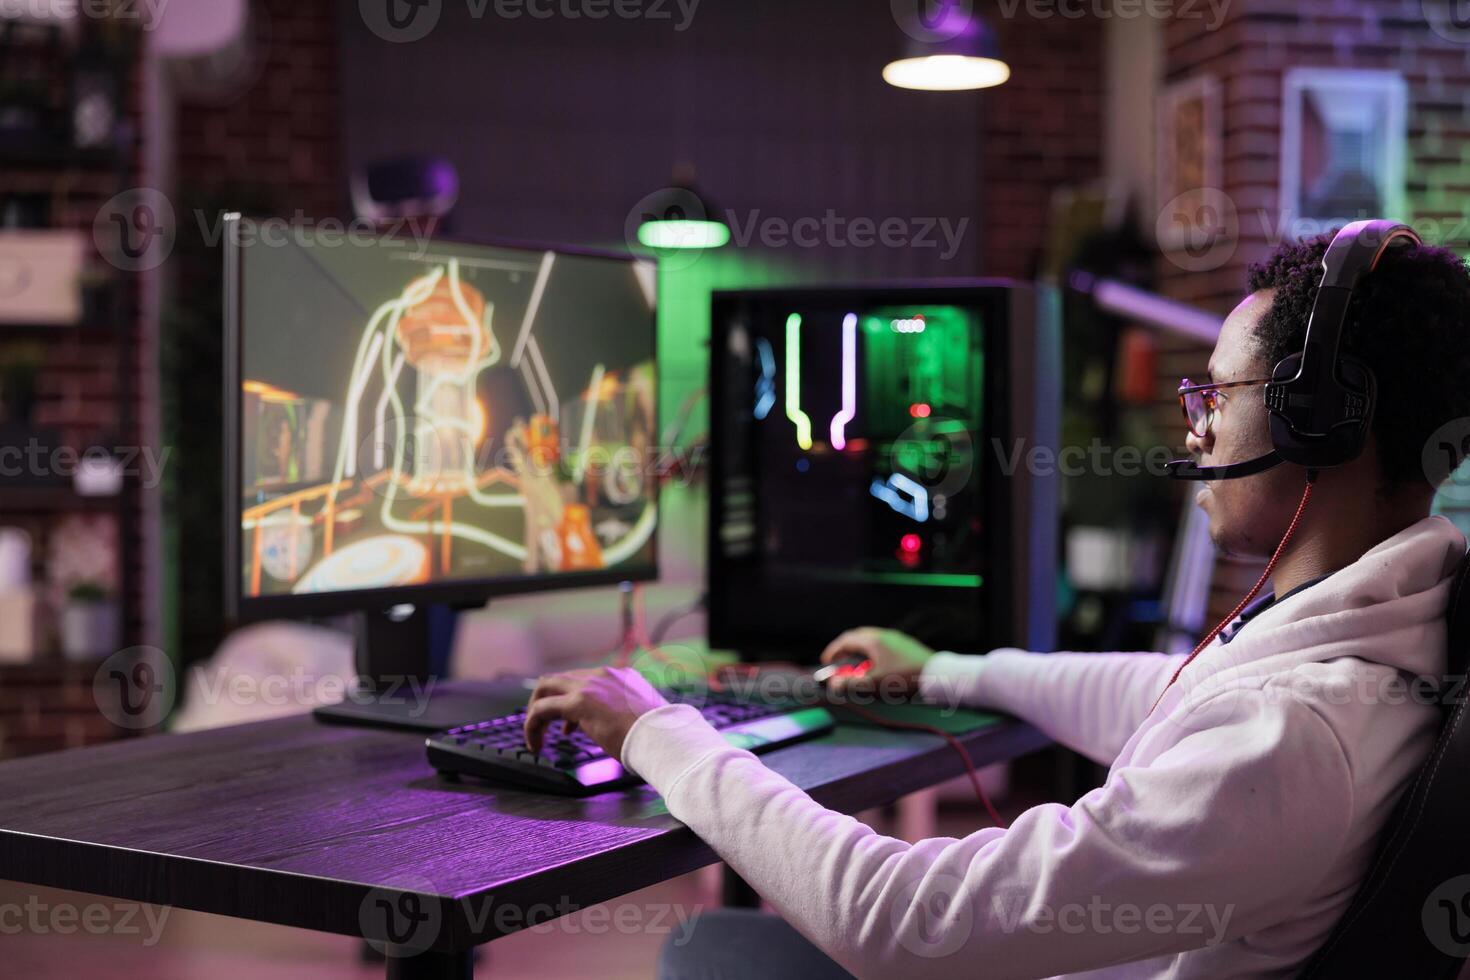 Man in brick wall living room playing games on gaming PC at computer desk, enjoying day off from work. Gamer battling enemies in online multiplayer shooter from neon lights ornate home photo